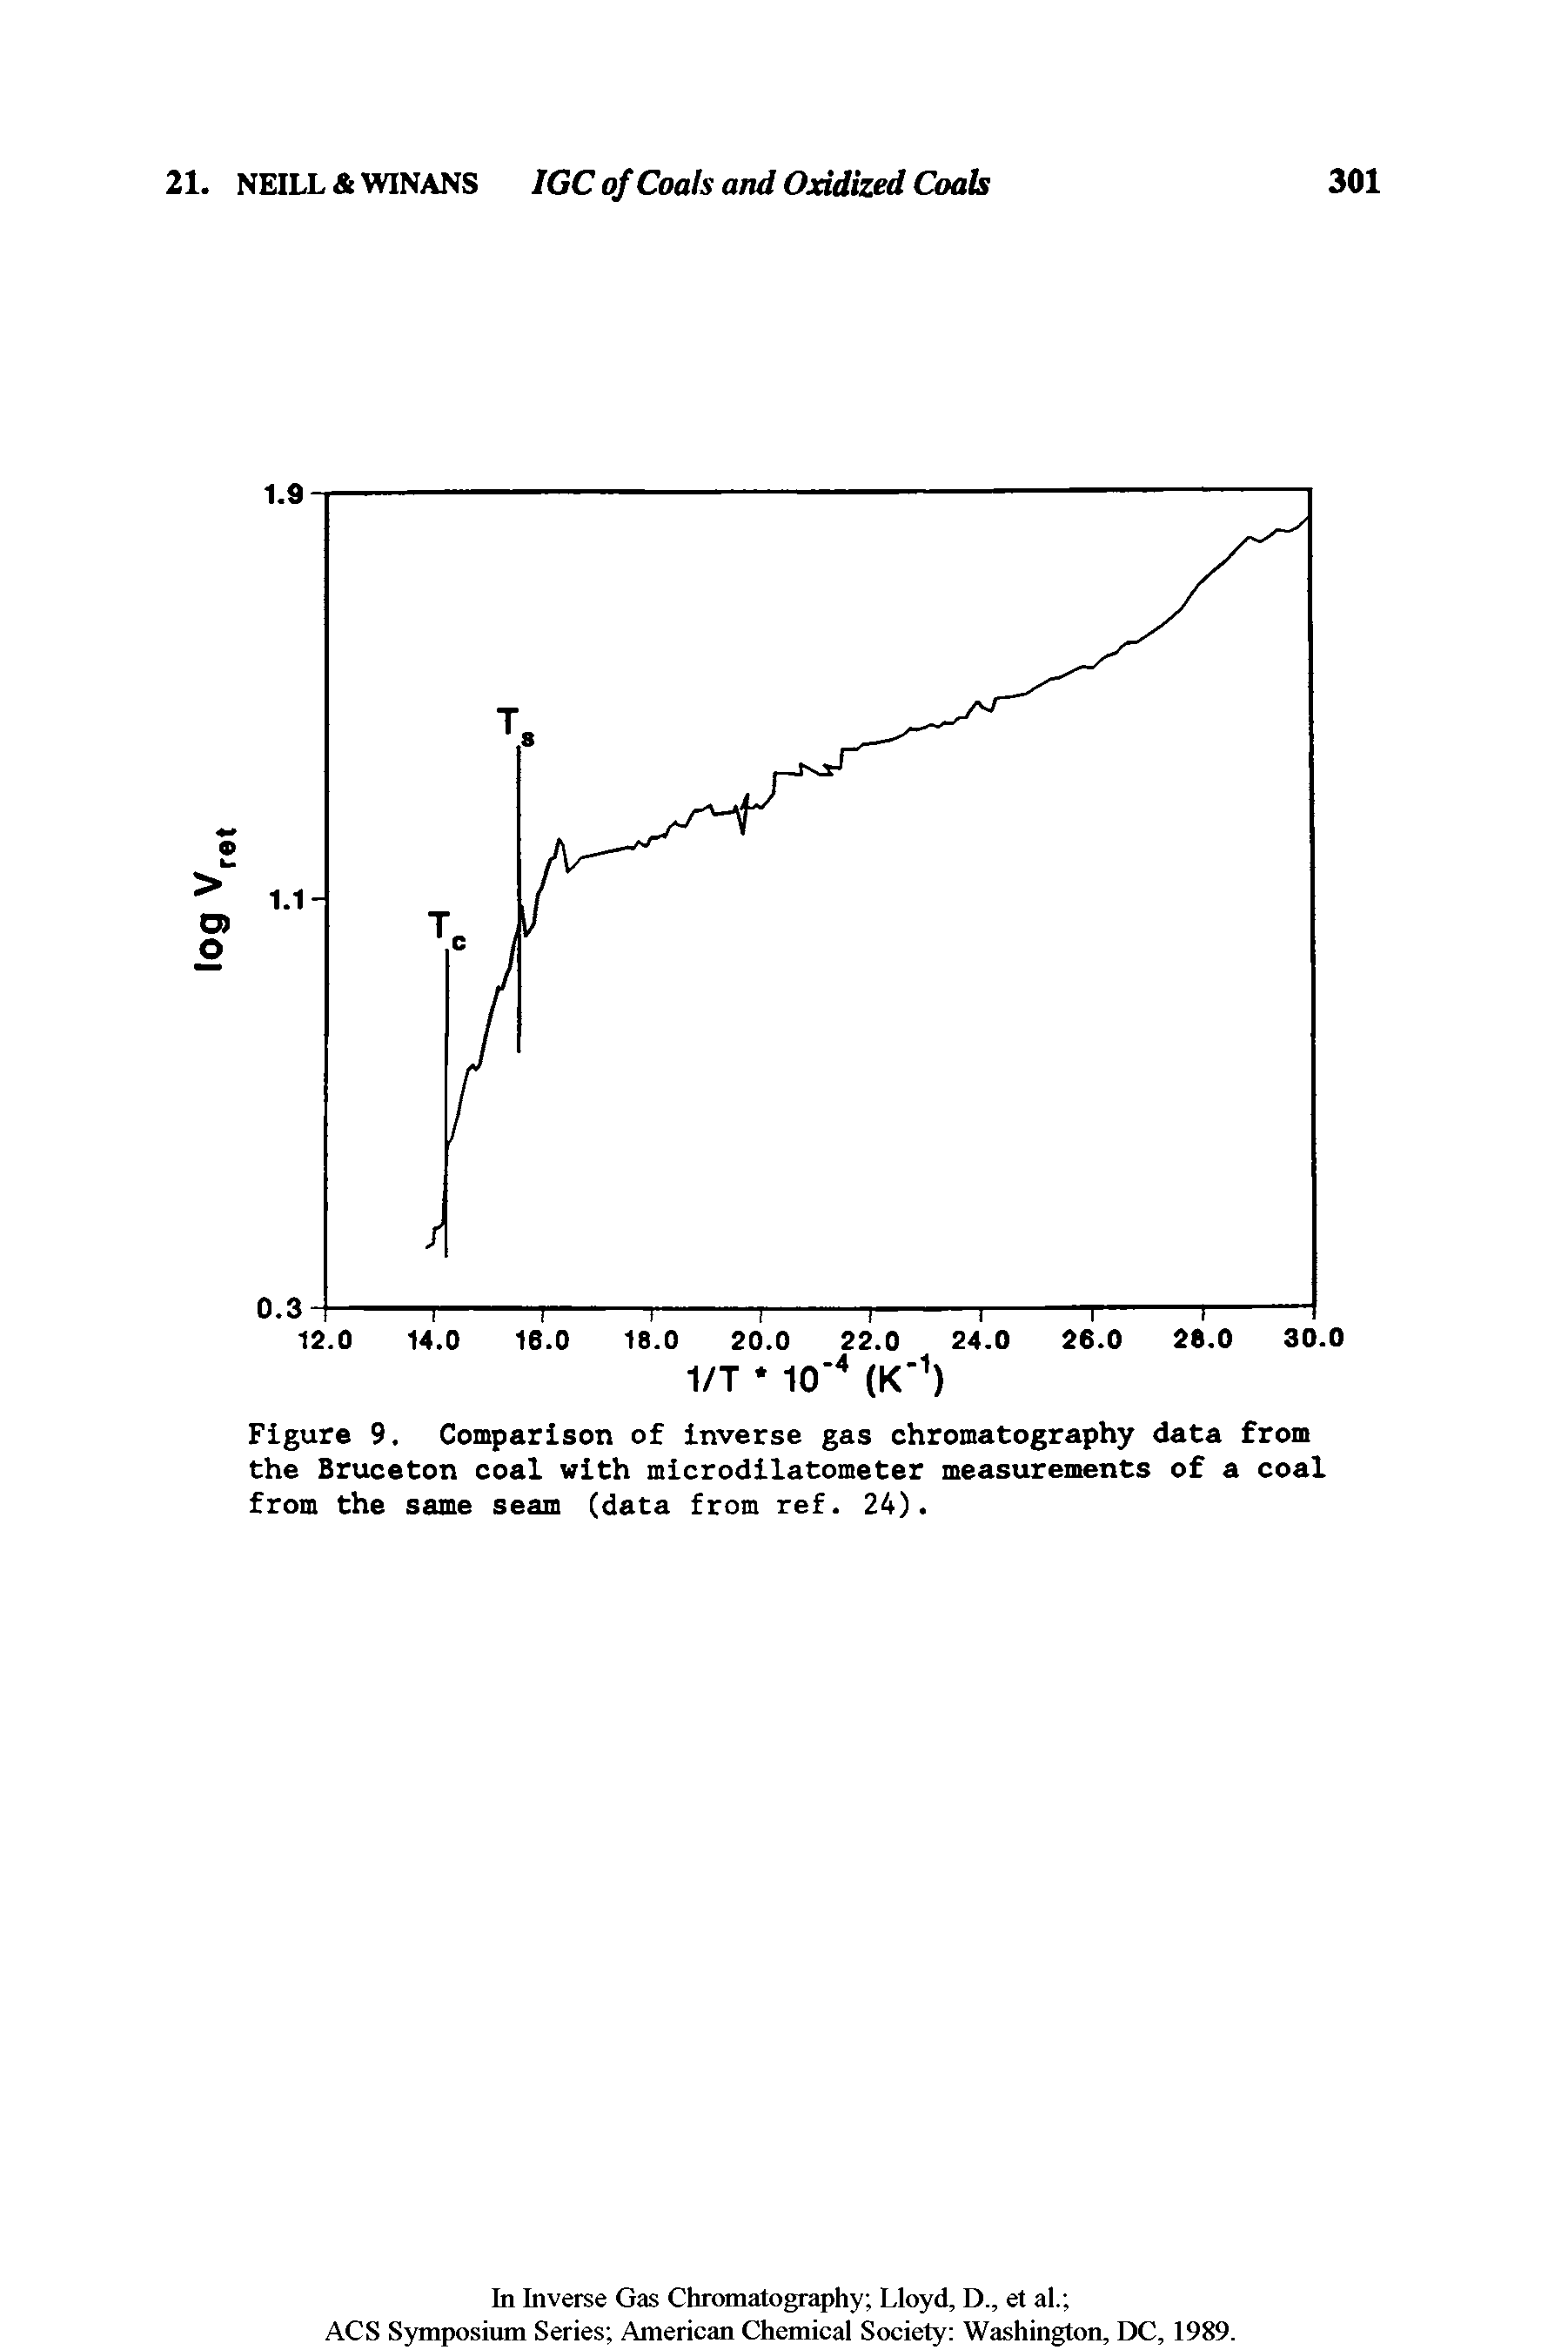 Figure 9. Comparison of inverse gas chromatography data from the Bruceton coal with microdilatometer measurements of a coal from the same seam (data from ref. 24).